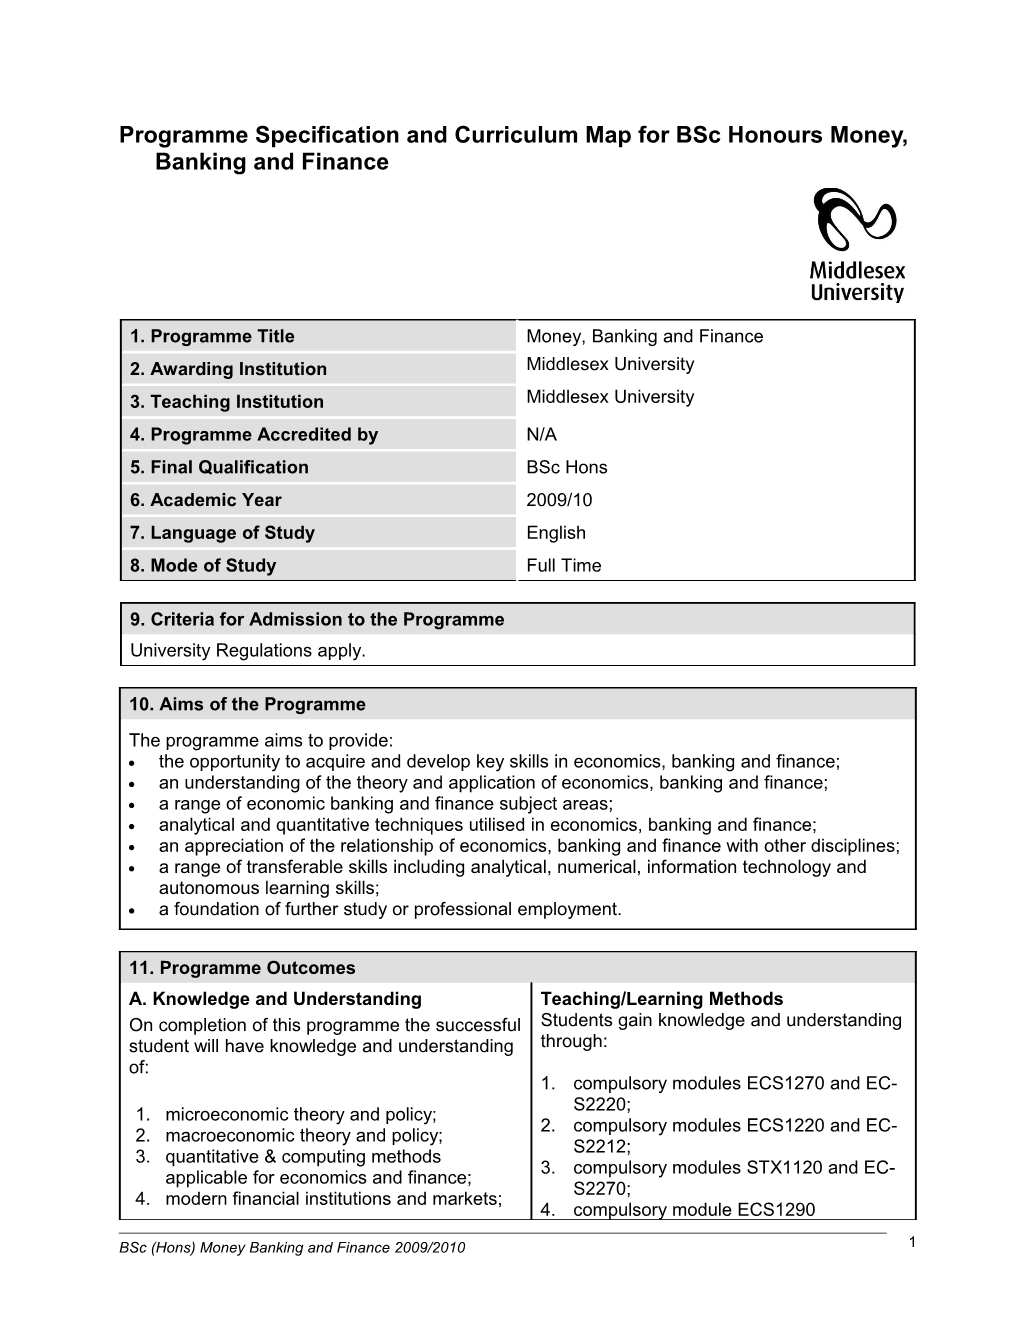 Programme Specification and Curriculum Map for Bsc Honours Money, Banking and Finance